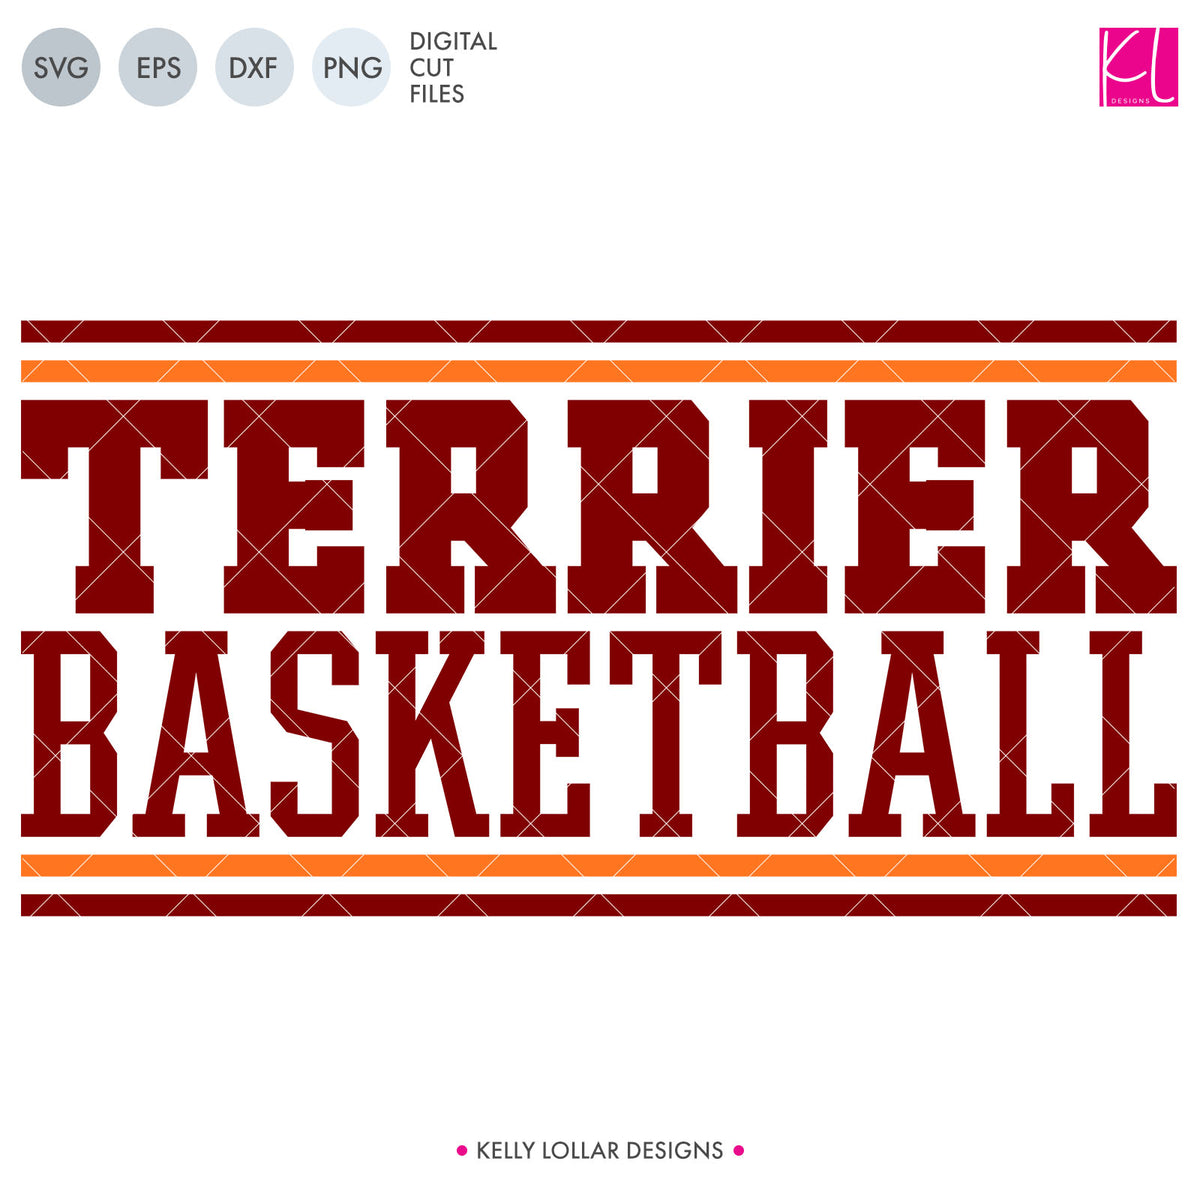 Terriers Basketball Bundle | SVG DXF EPS PNG Cut Files